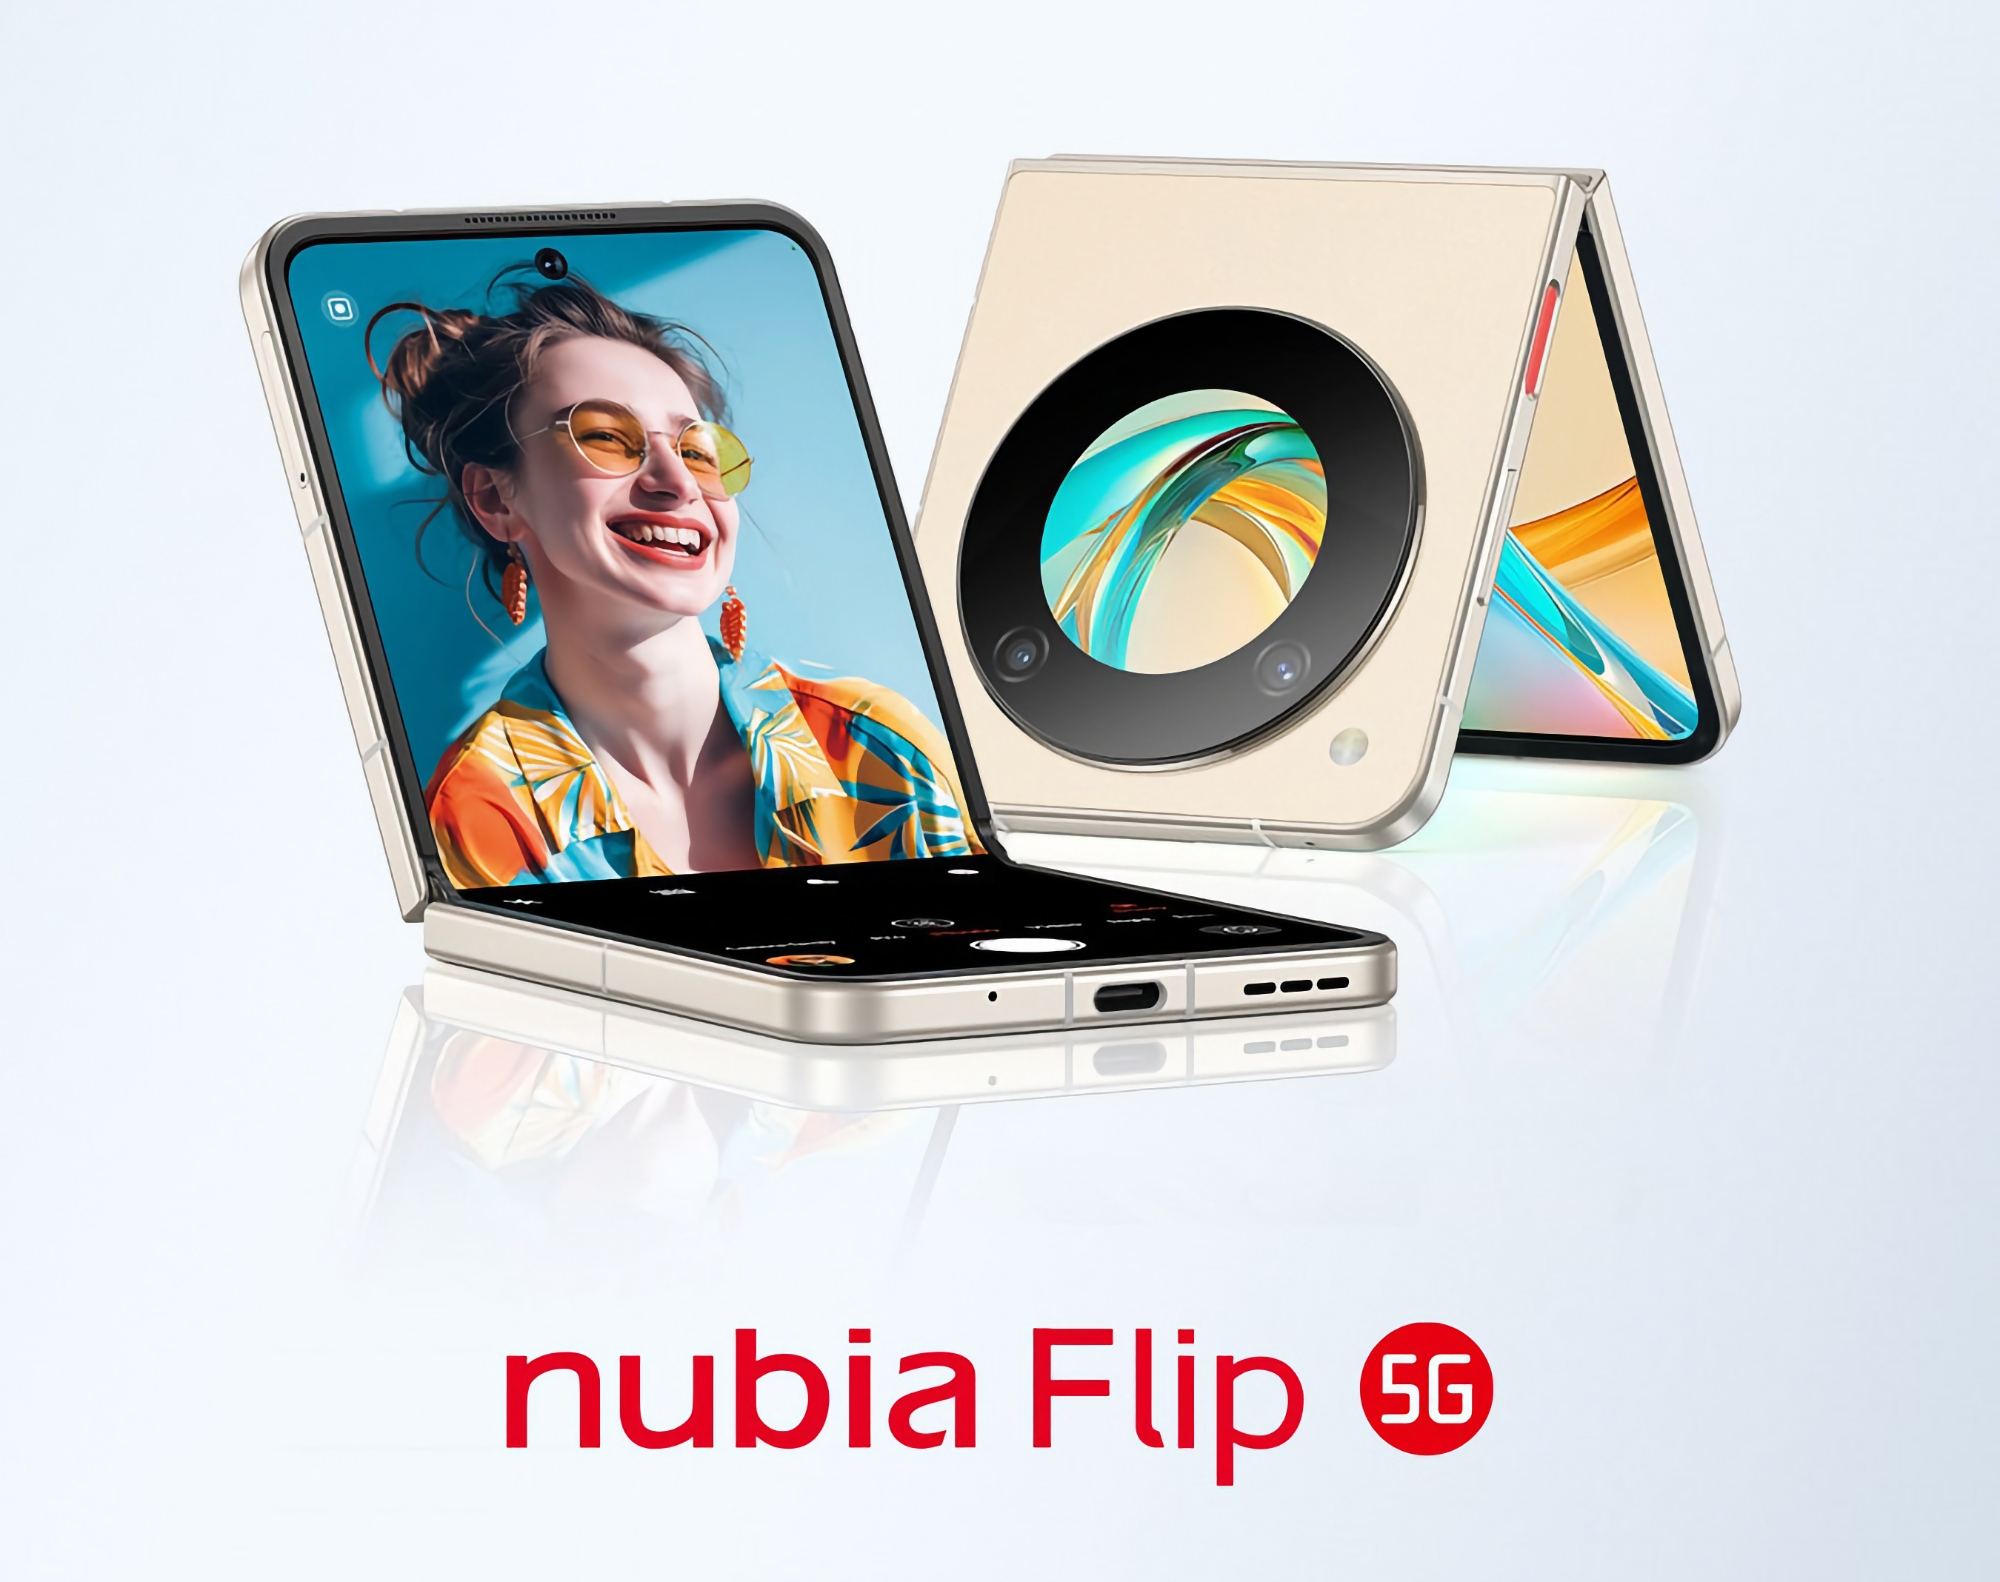 From $499: nubia Flip 5G foldable smartphone with Snapdragon 7 Gen 1 chip and dual screens has made its global debut